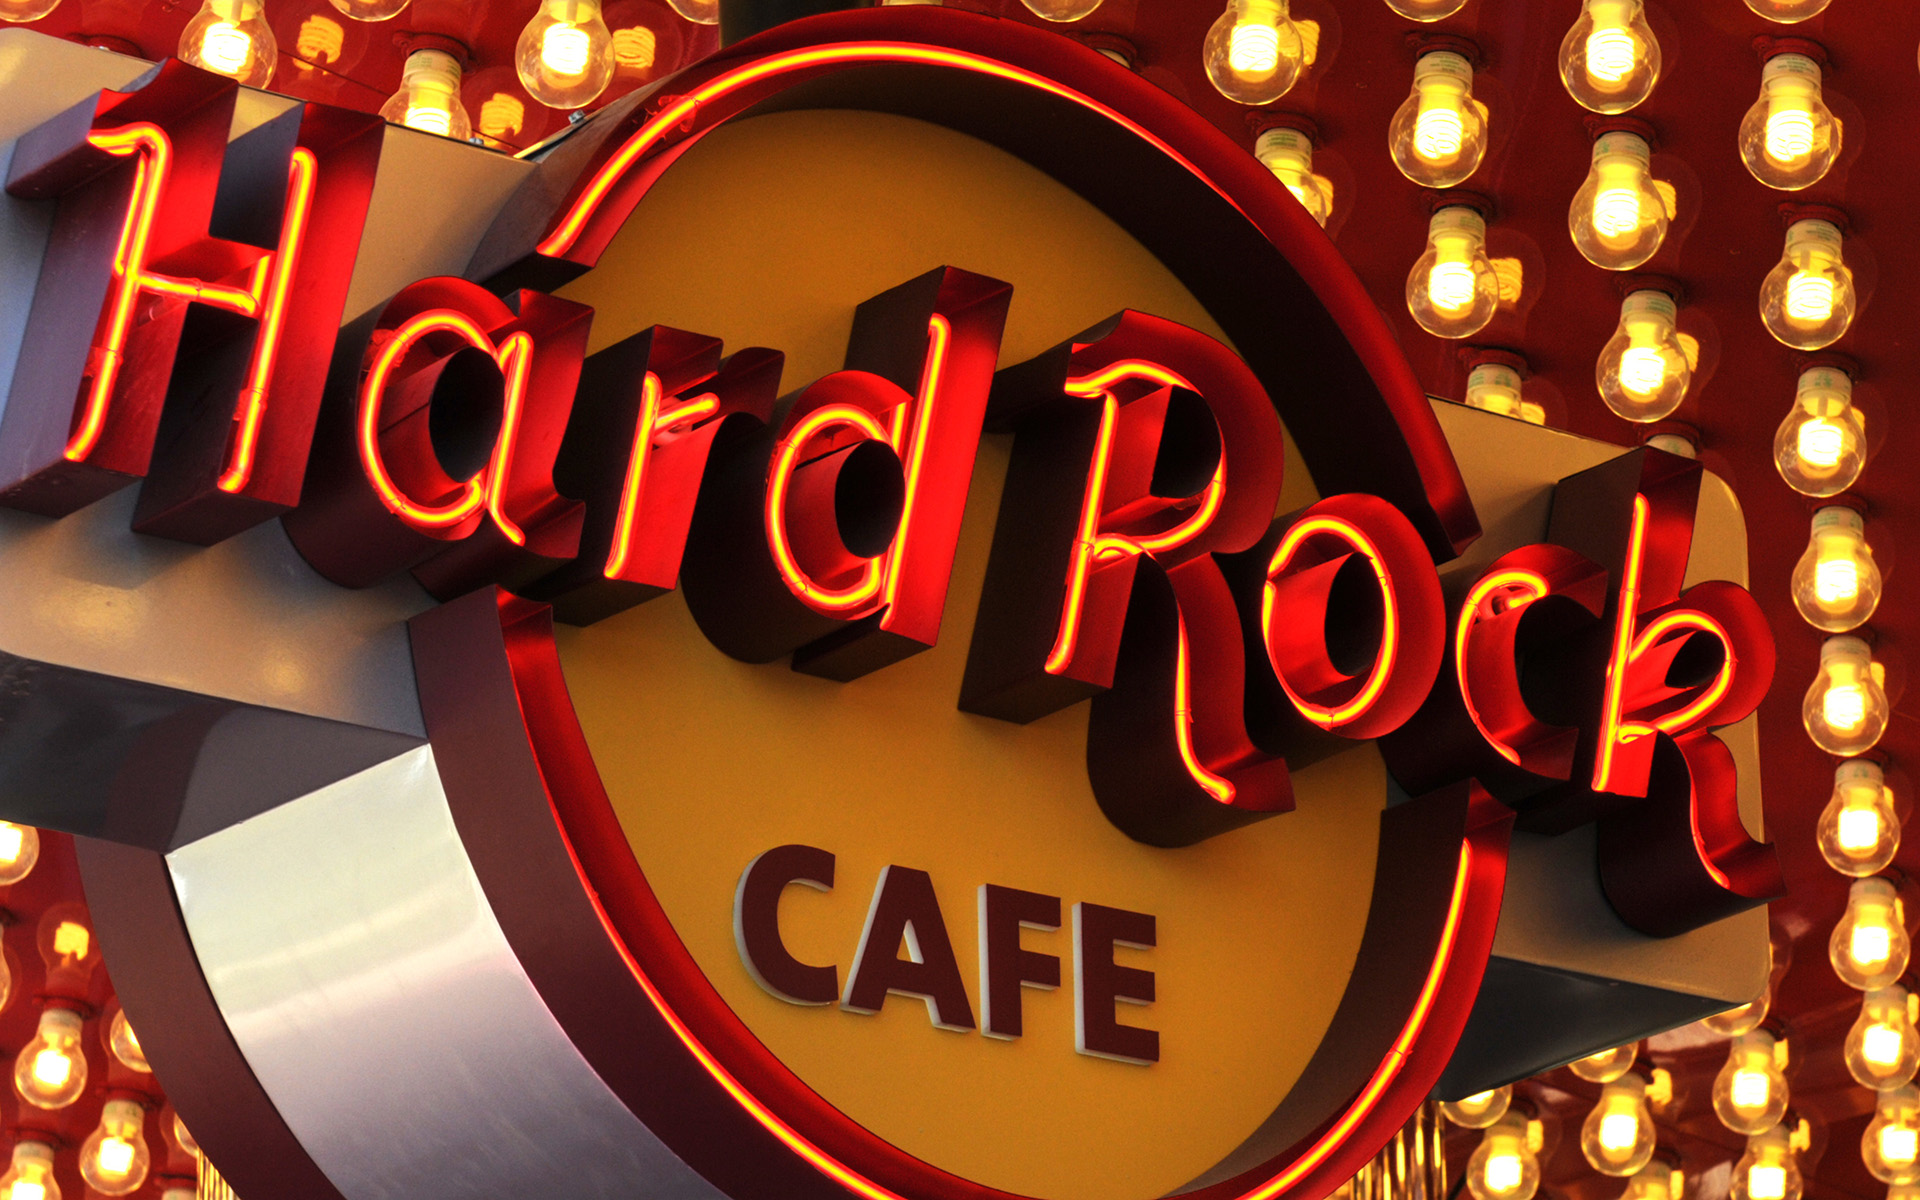 Hard Rock Cafe Wallpapers